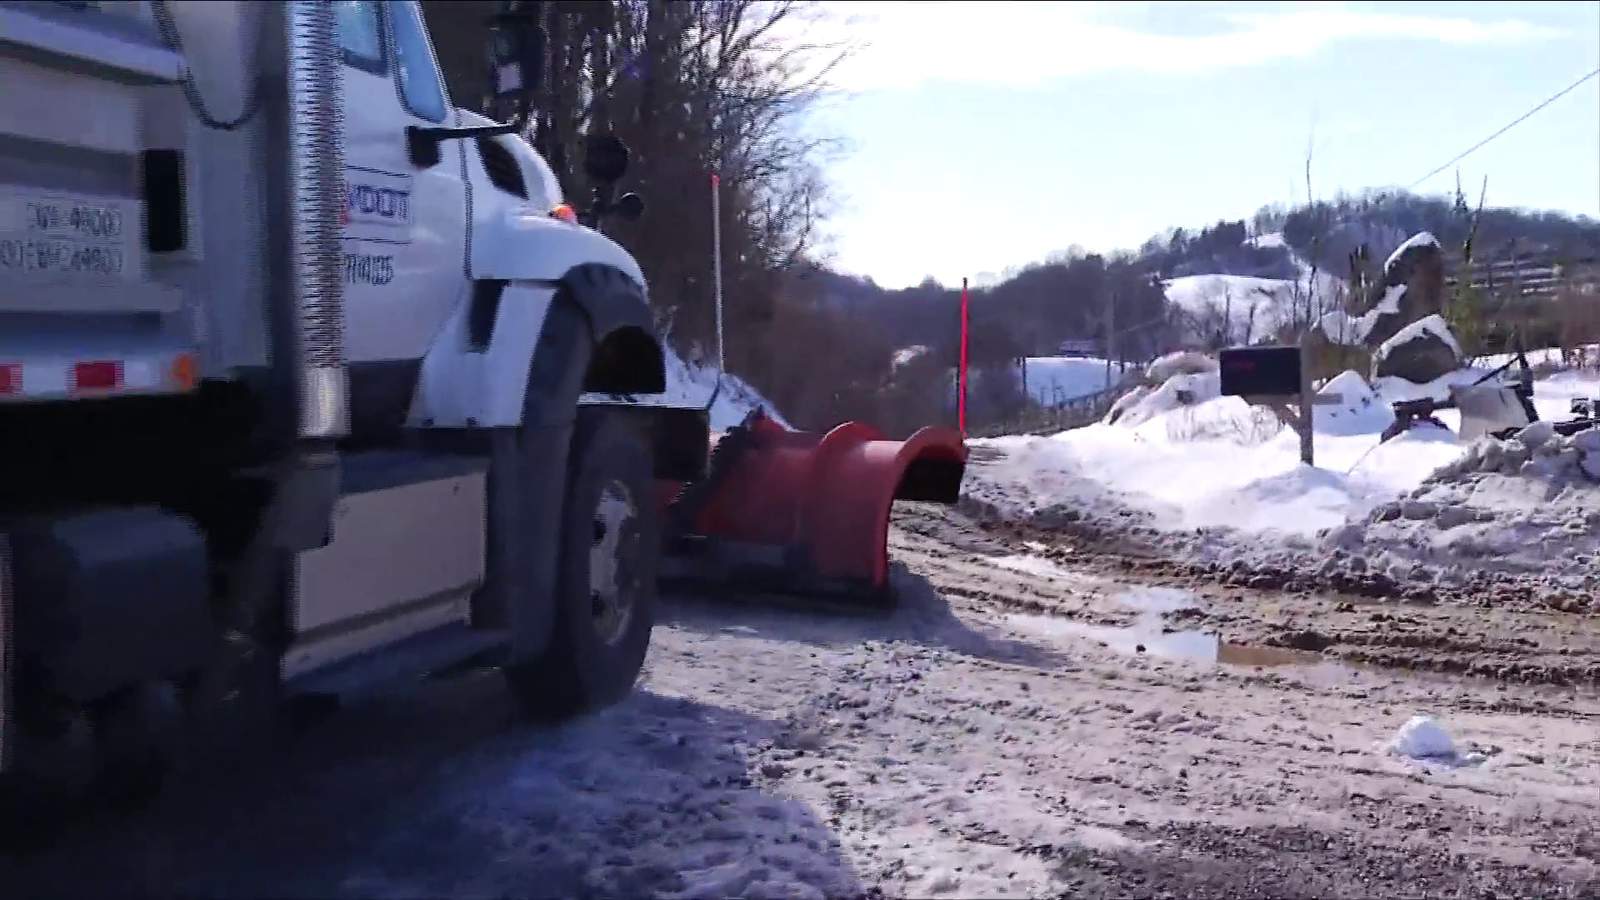 How VDOT plans to keep workers safe during winter months